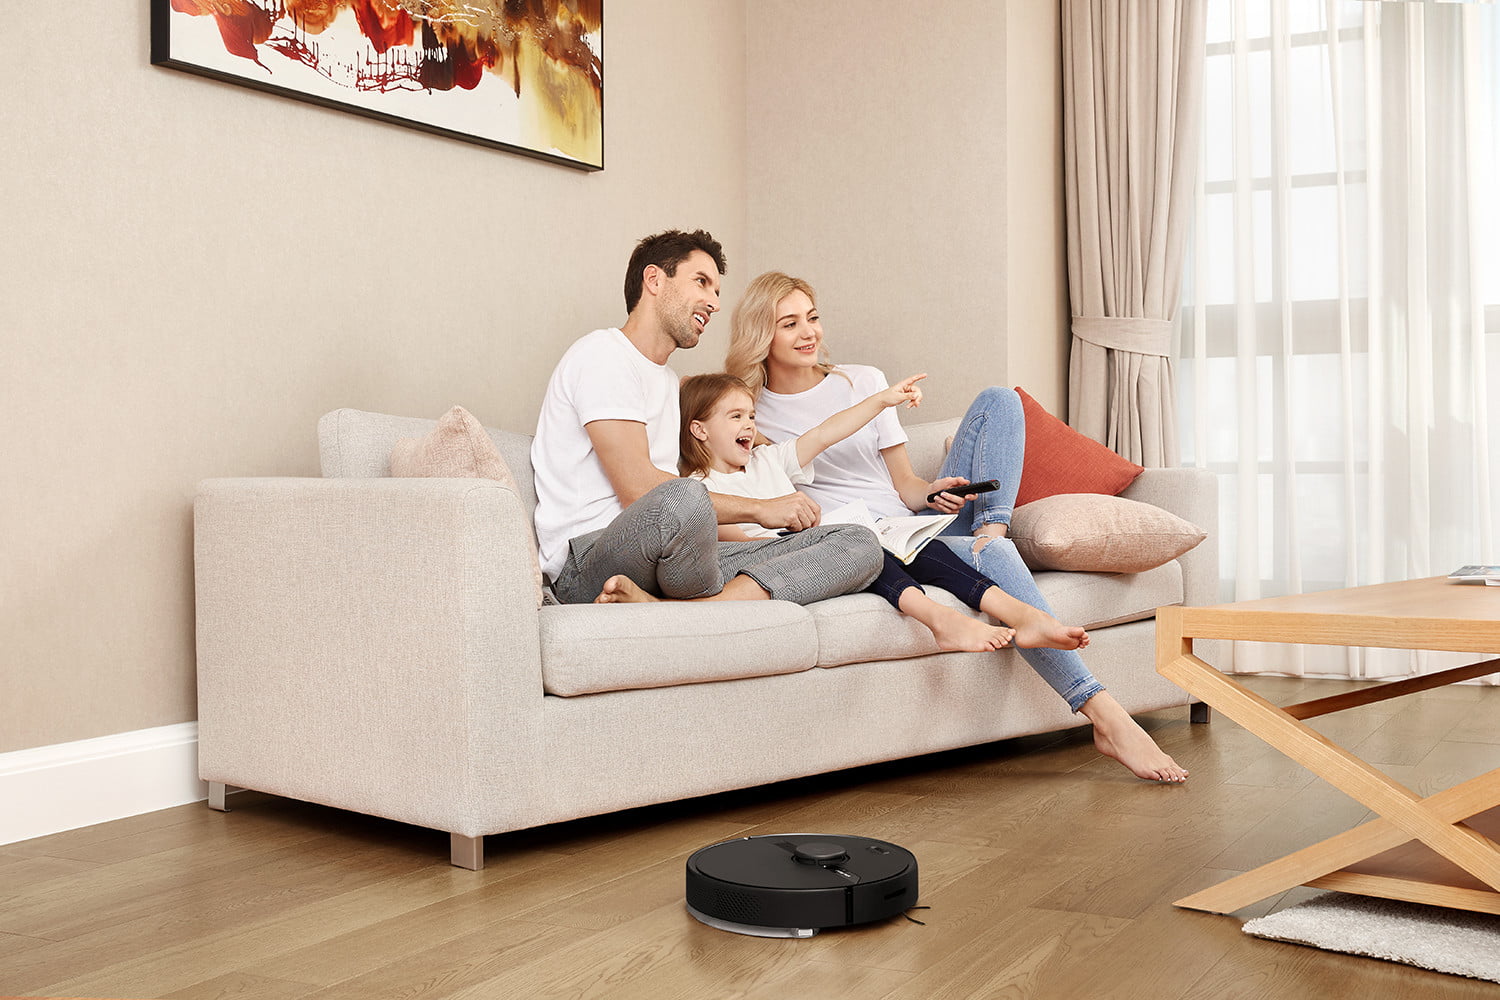 Best cheap robot vacuum deals in May 2021: Eufy and Roomba